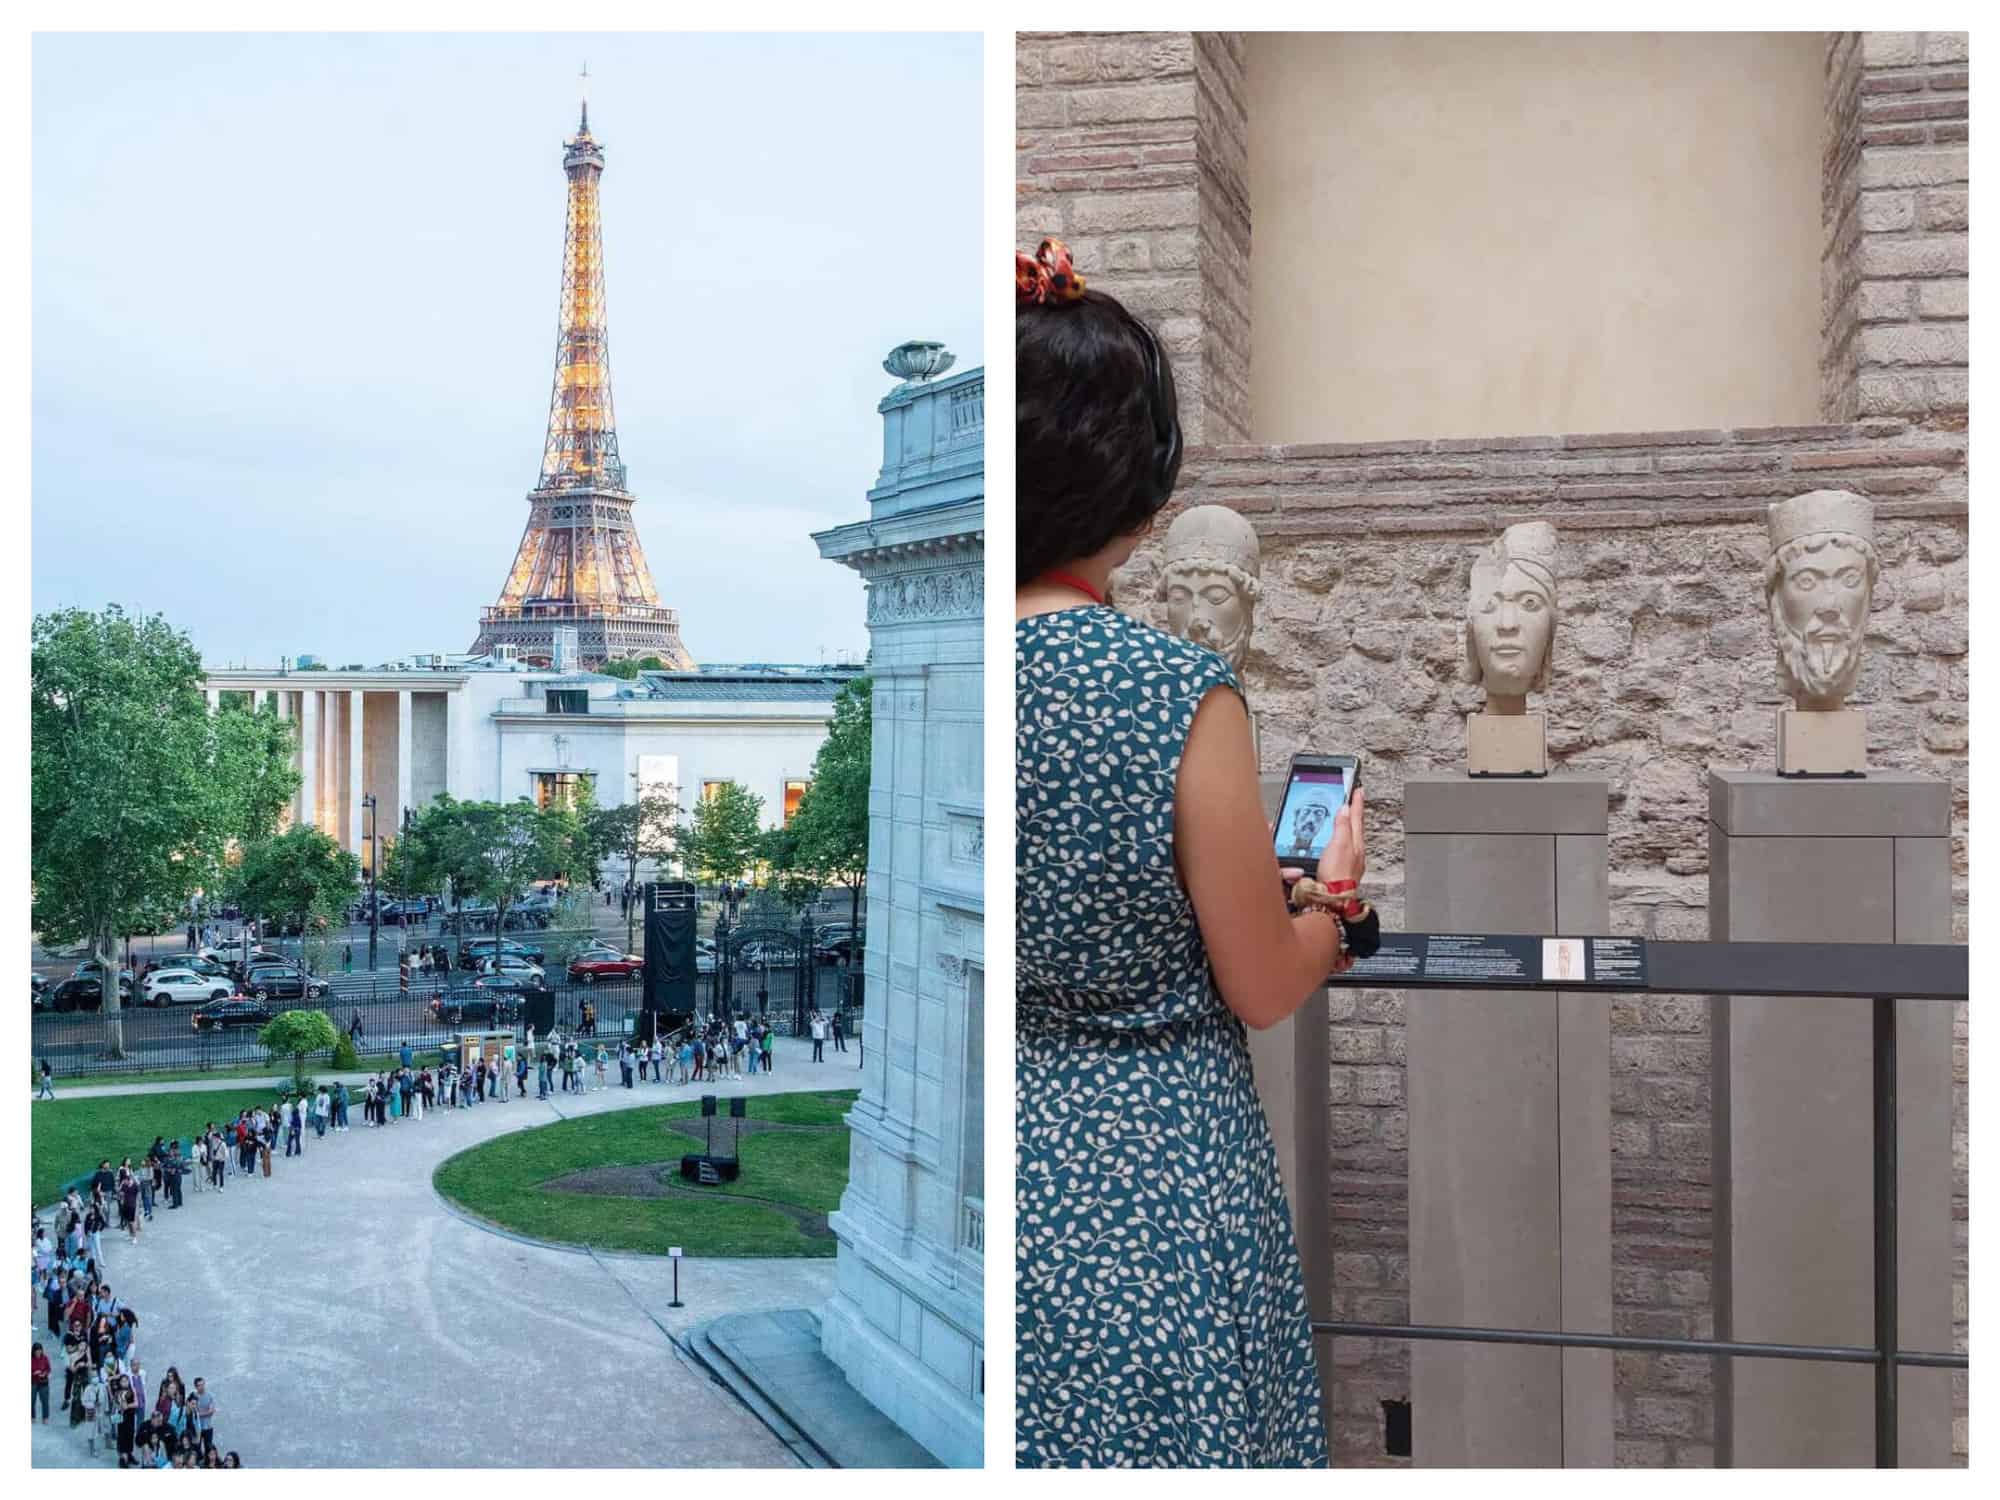 (Left) A line of people wait to go into a museum near the Eiffel Tower / (Right) A woman in a green and white dress looks at three white busts. 